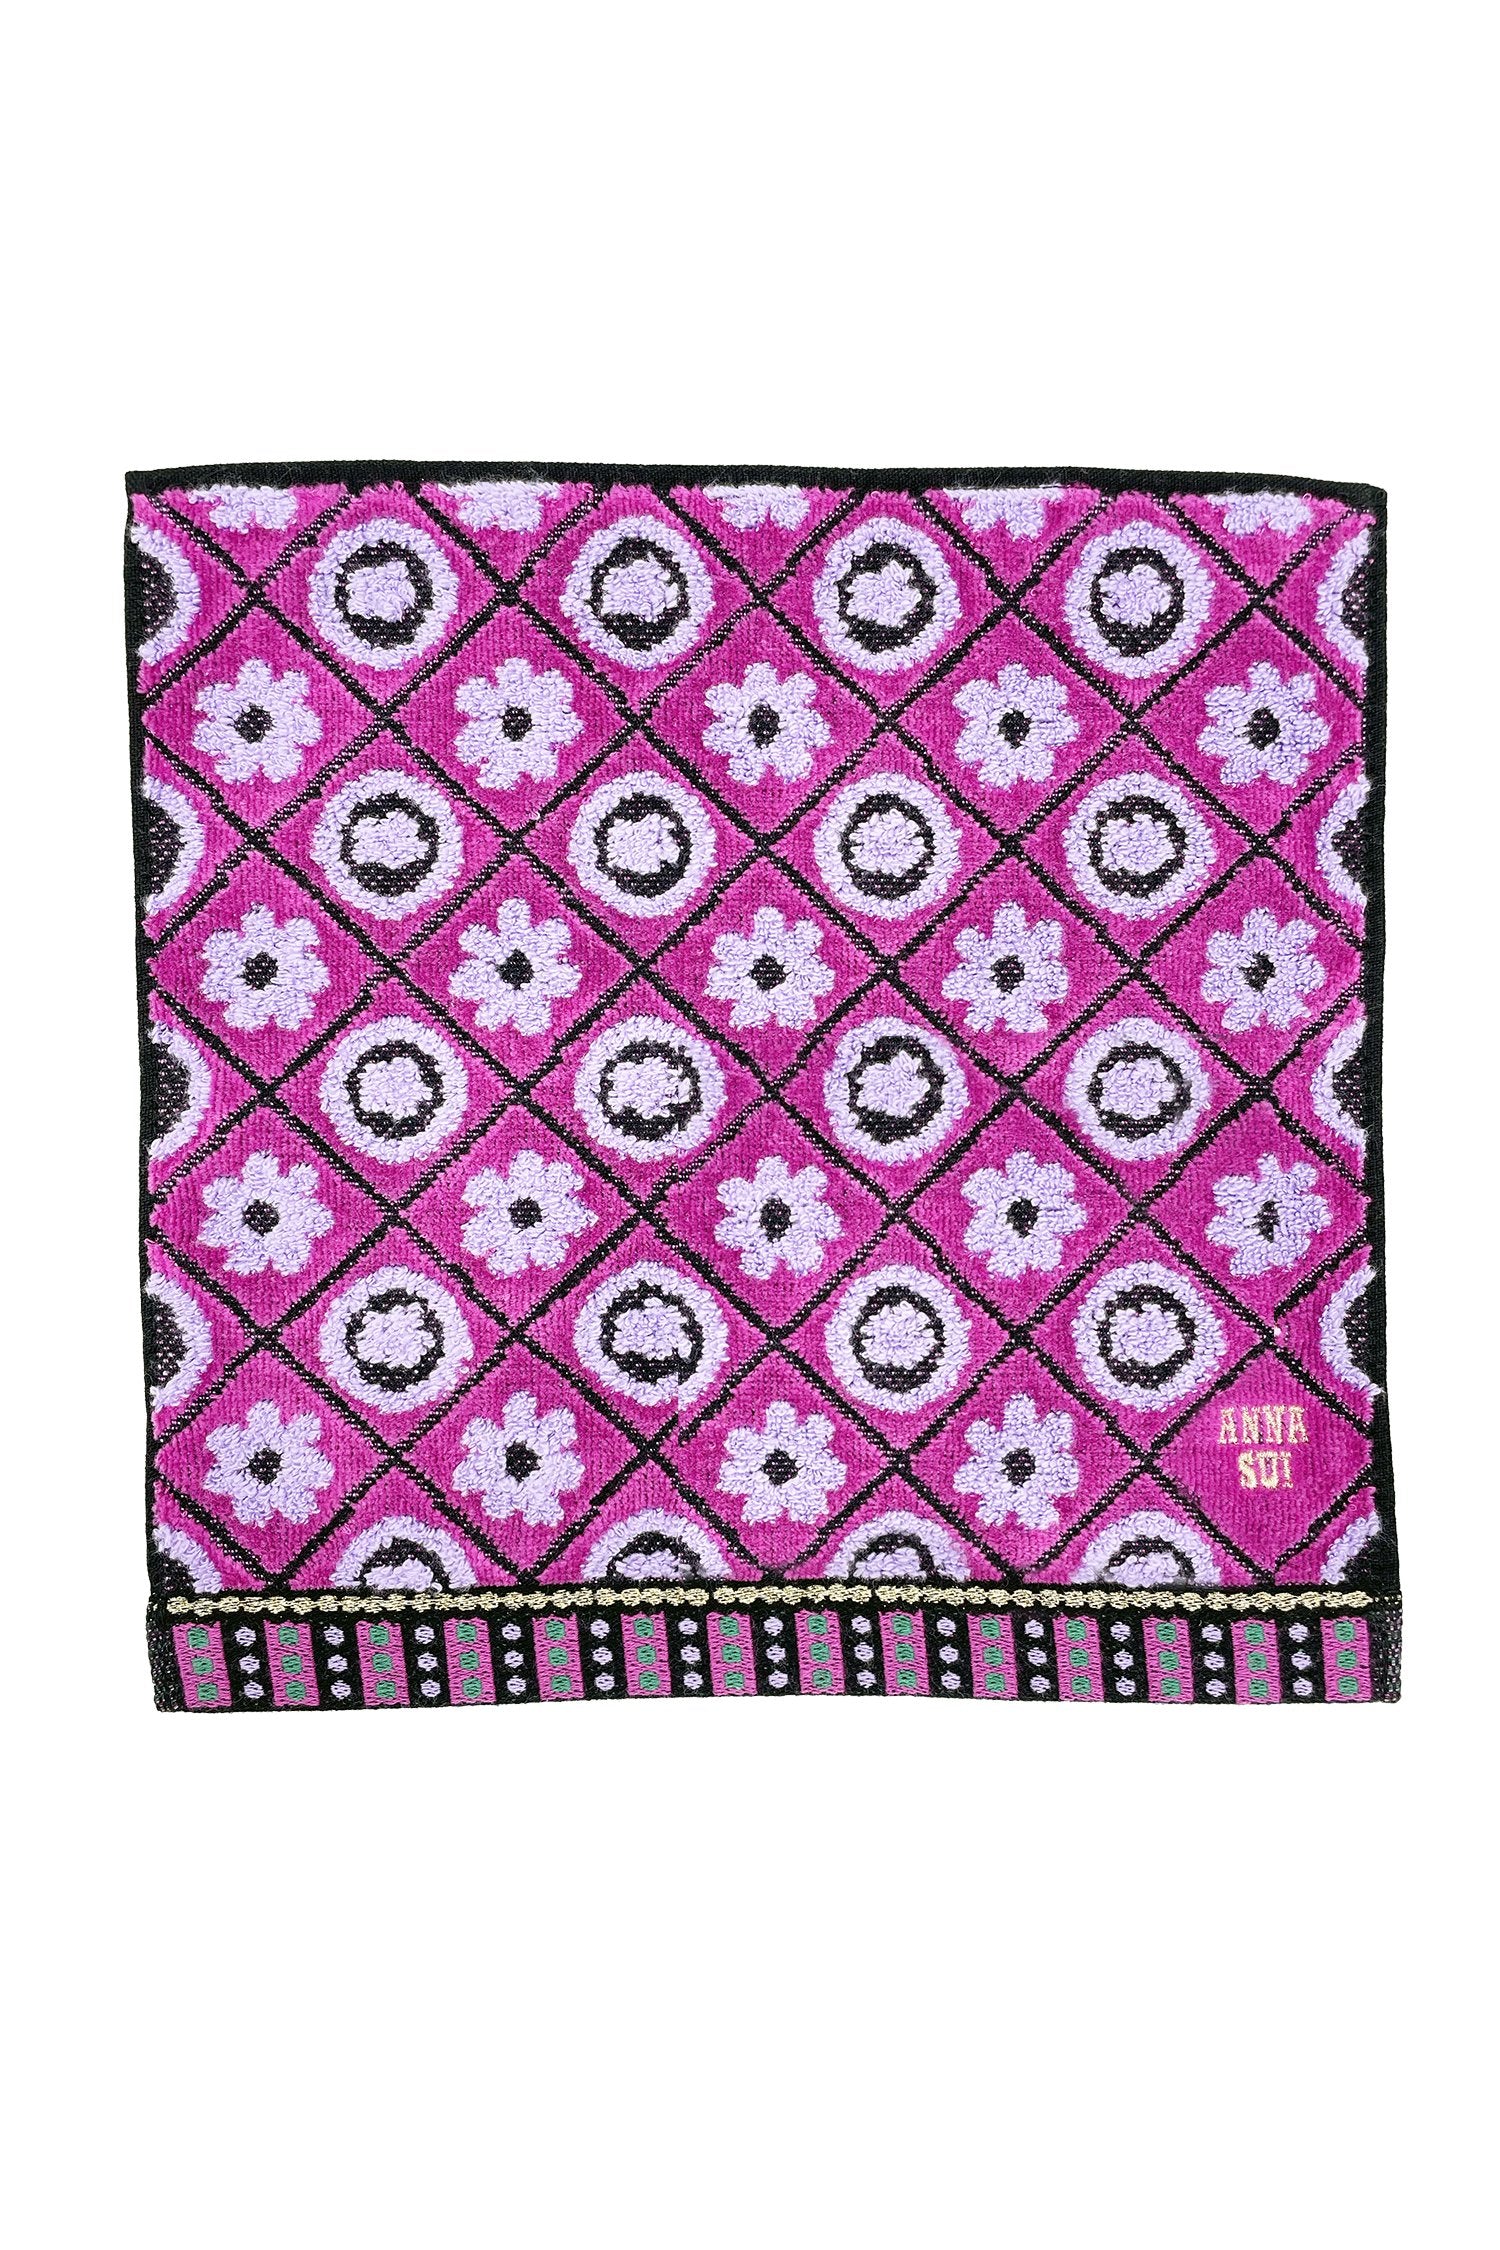 Washcloth purple with Floral Lattice in white, black lines to highlight the diamonds, Anna Sui's label